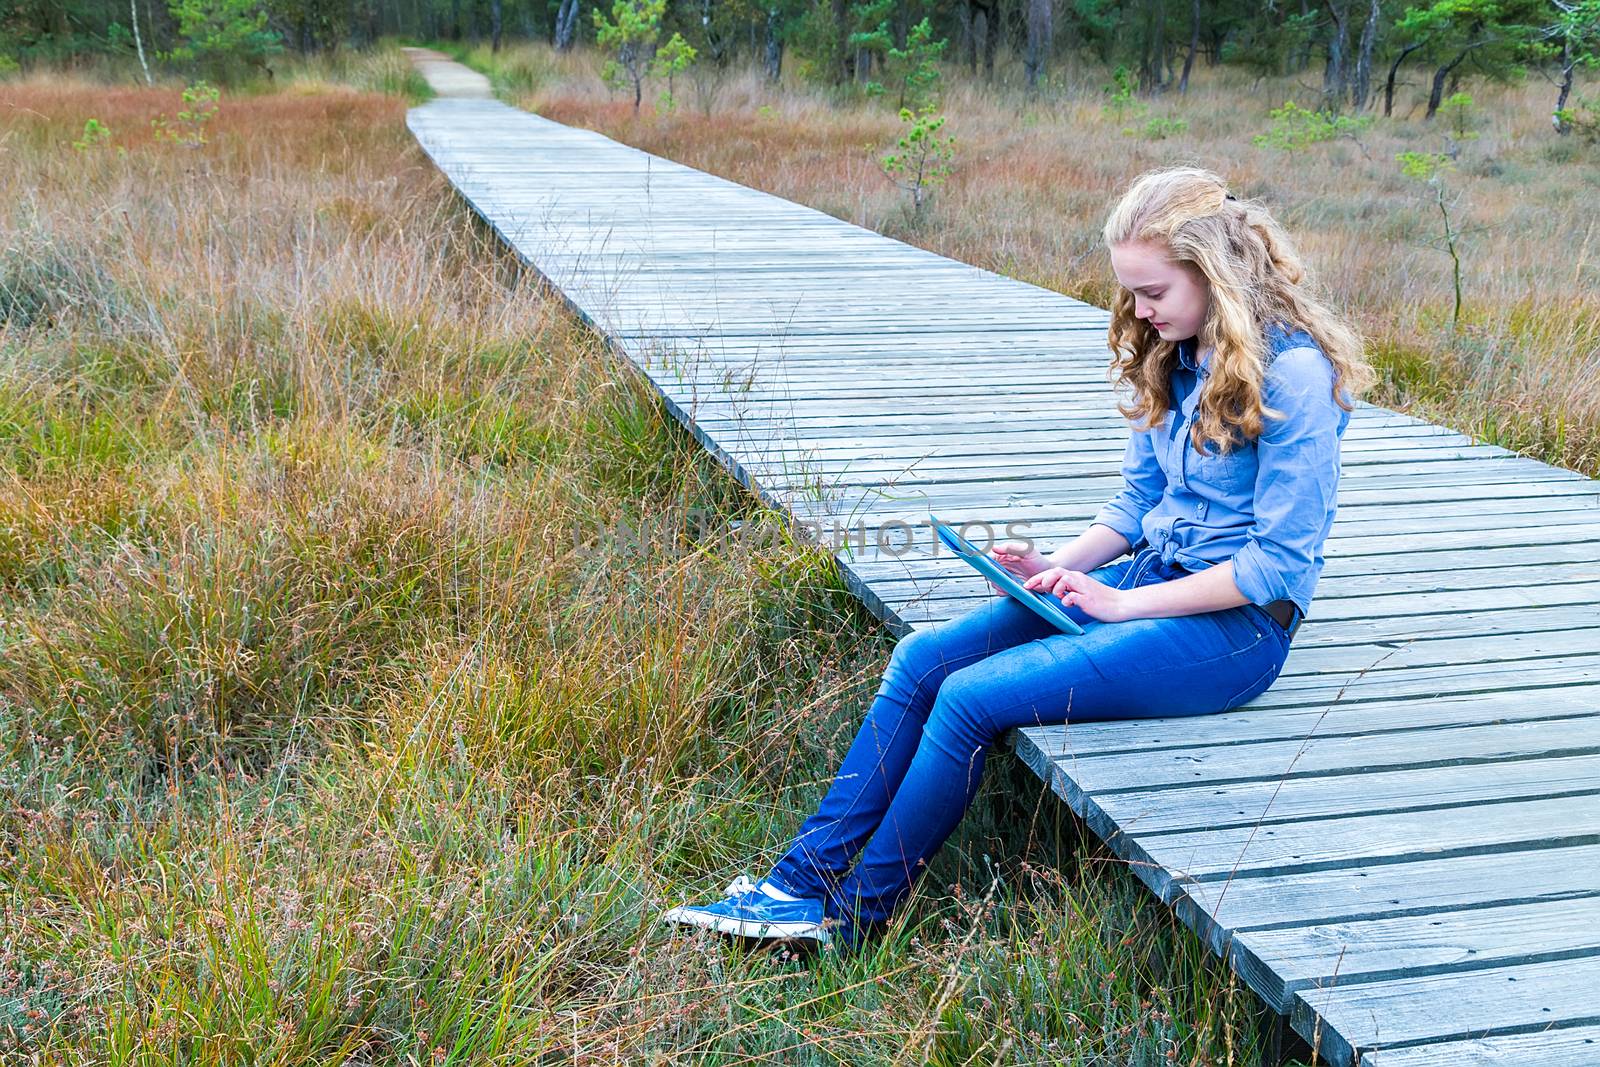 Blonde girl working on tablet computer on wooden path in nature by BenSchonewille